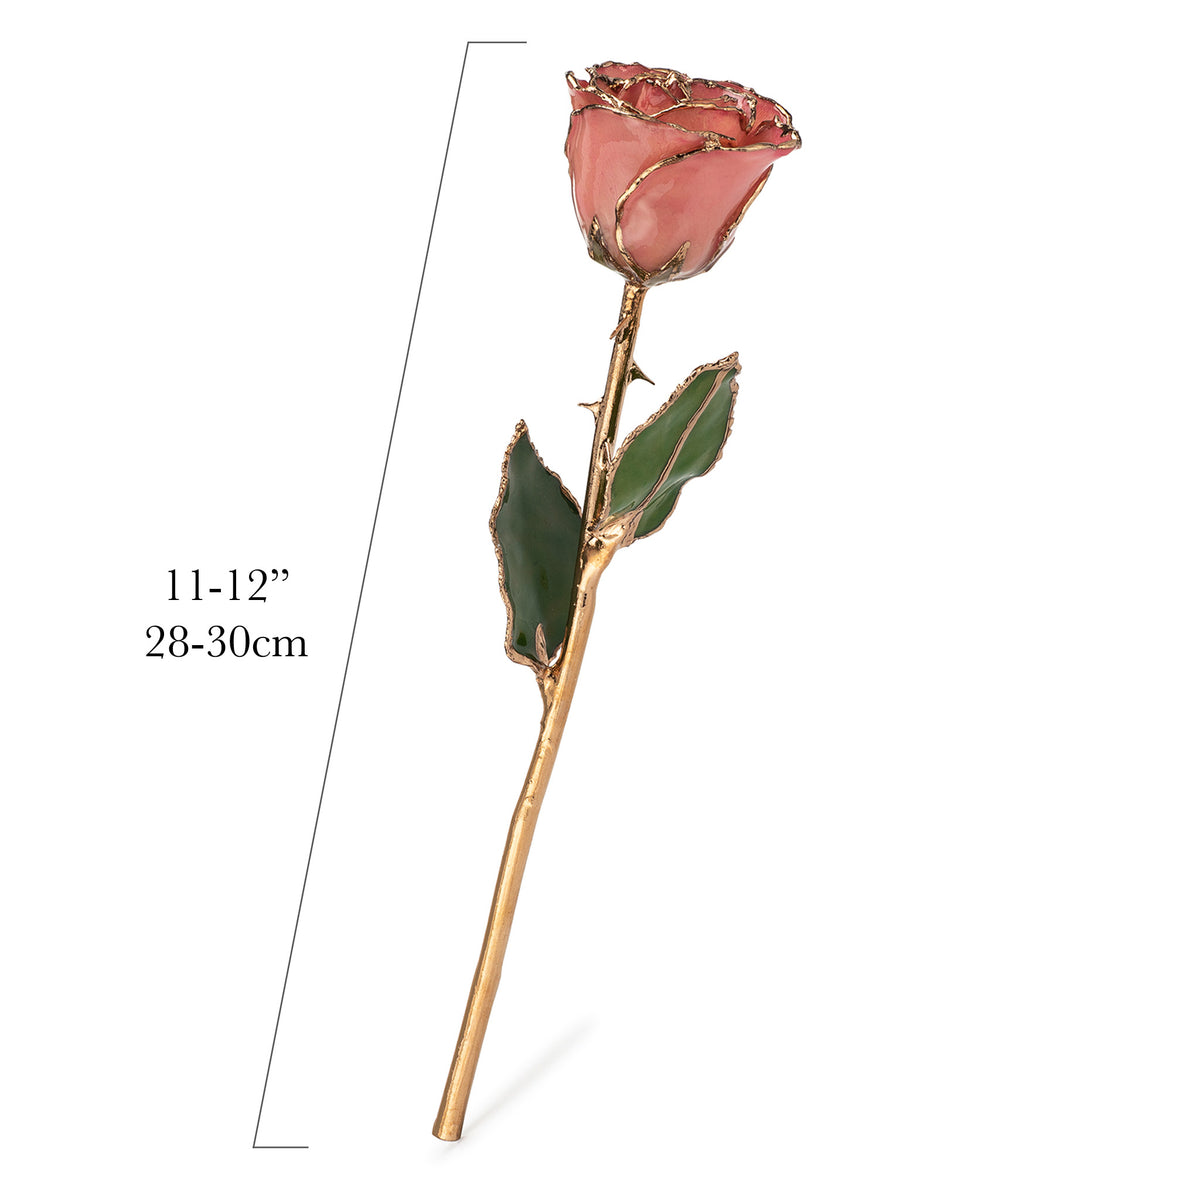 24K Gold Trimmed Forever Rose with Pink Petals. View of Stem, Leaves, and Rose Petals and Showing Detail of Gold Trim measurements